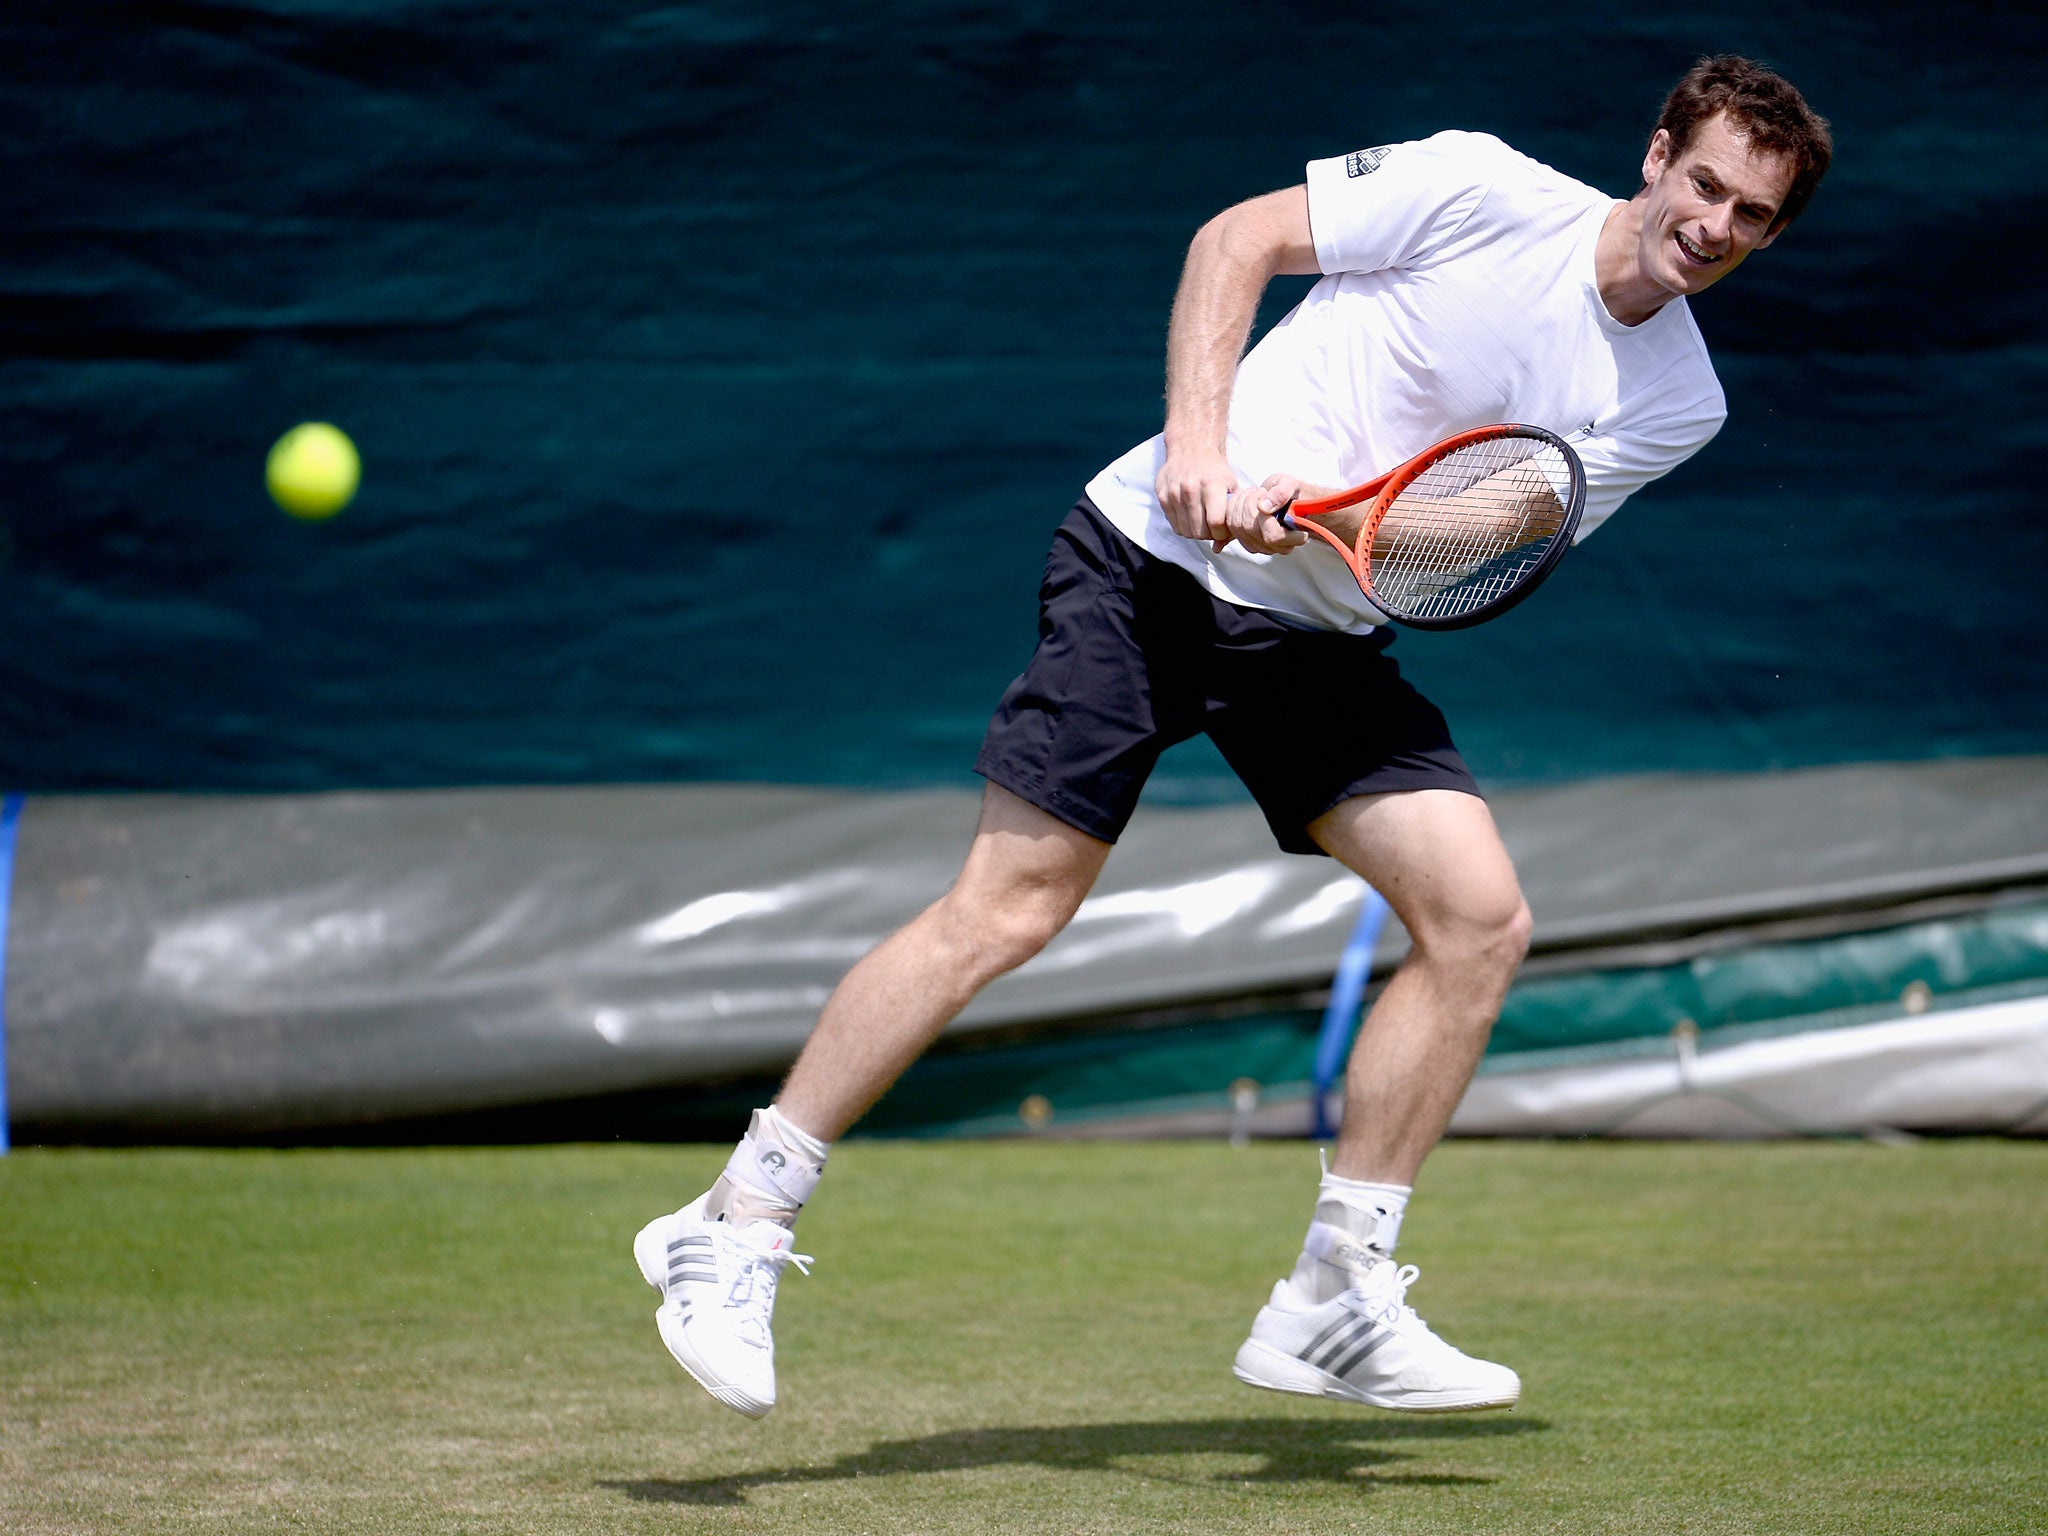 Andy Murray works on his backhand during a training session at Wimbledon